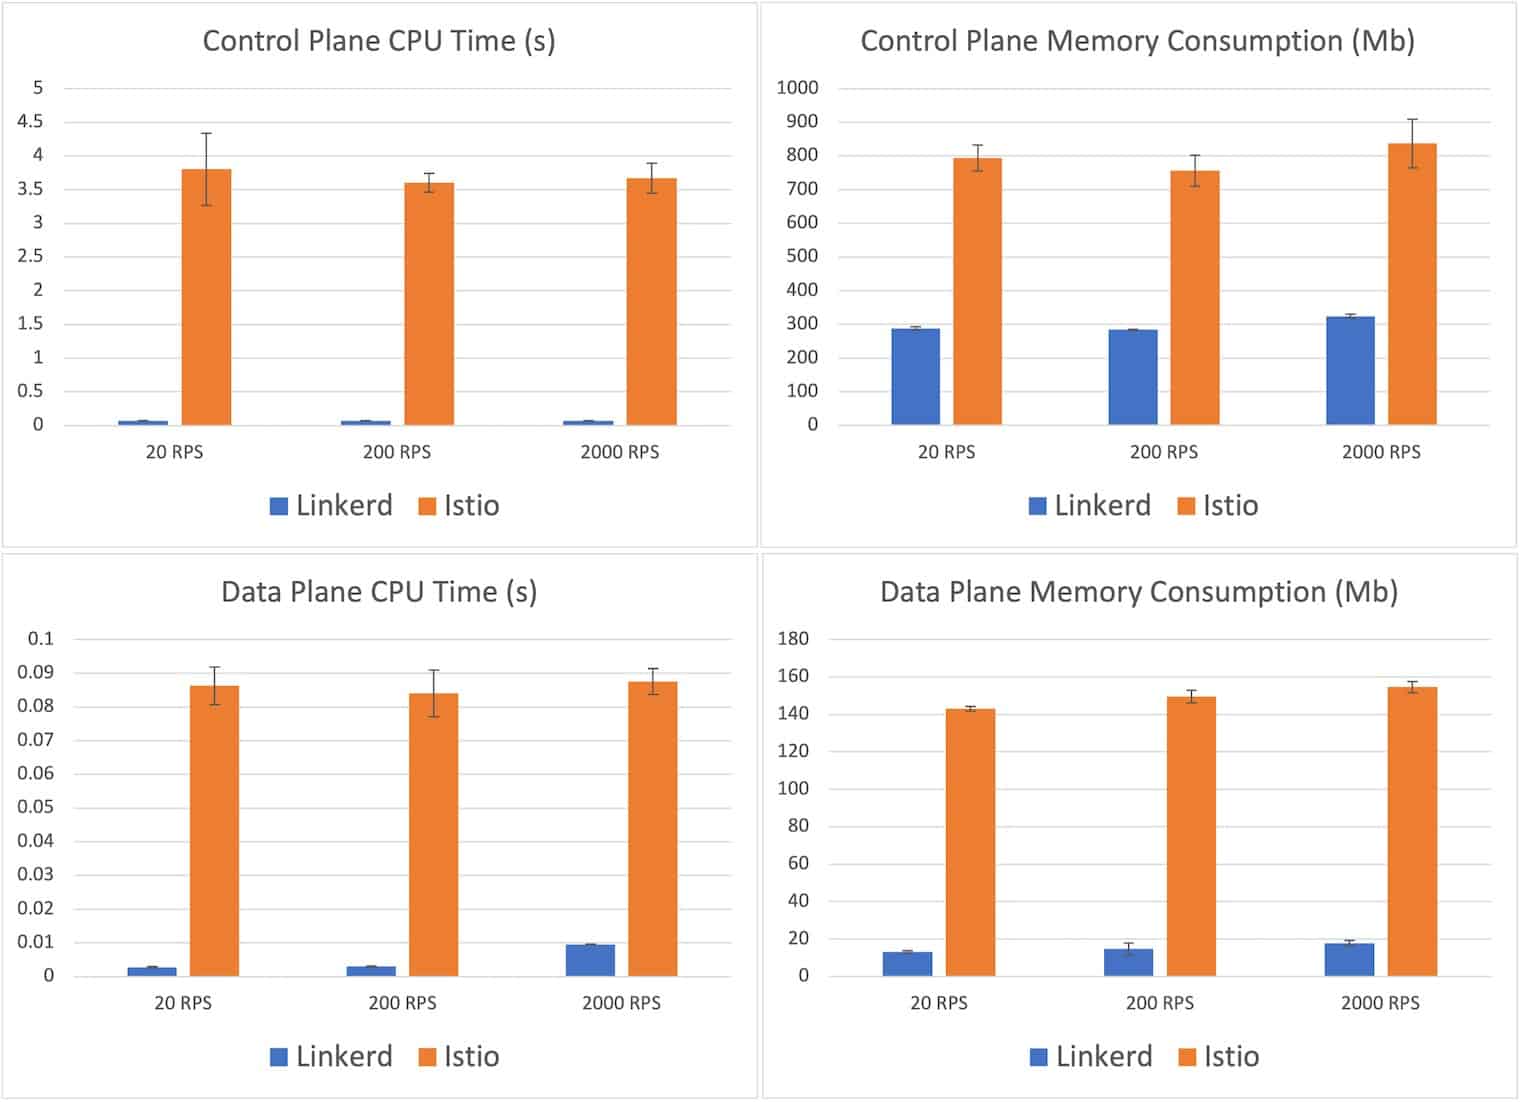 Bar chart showing comparison between Linkerd and Istio in Control Plane CPU time (s), Control Plane Memory Consumption (Mb), Data Plane CPU Time (s), and Data Plane Memory Consumption (Mb) where Istio shows the highest number among all